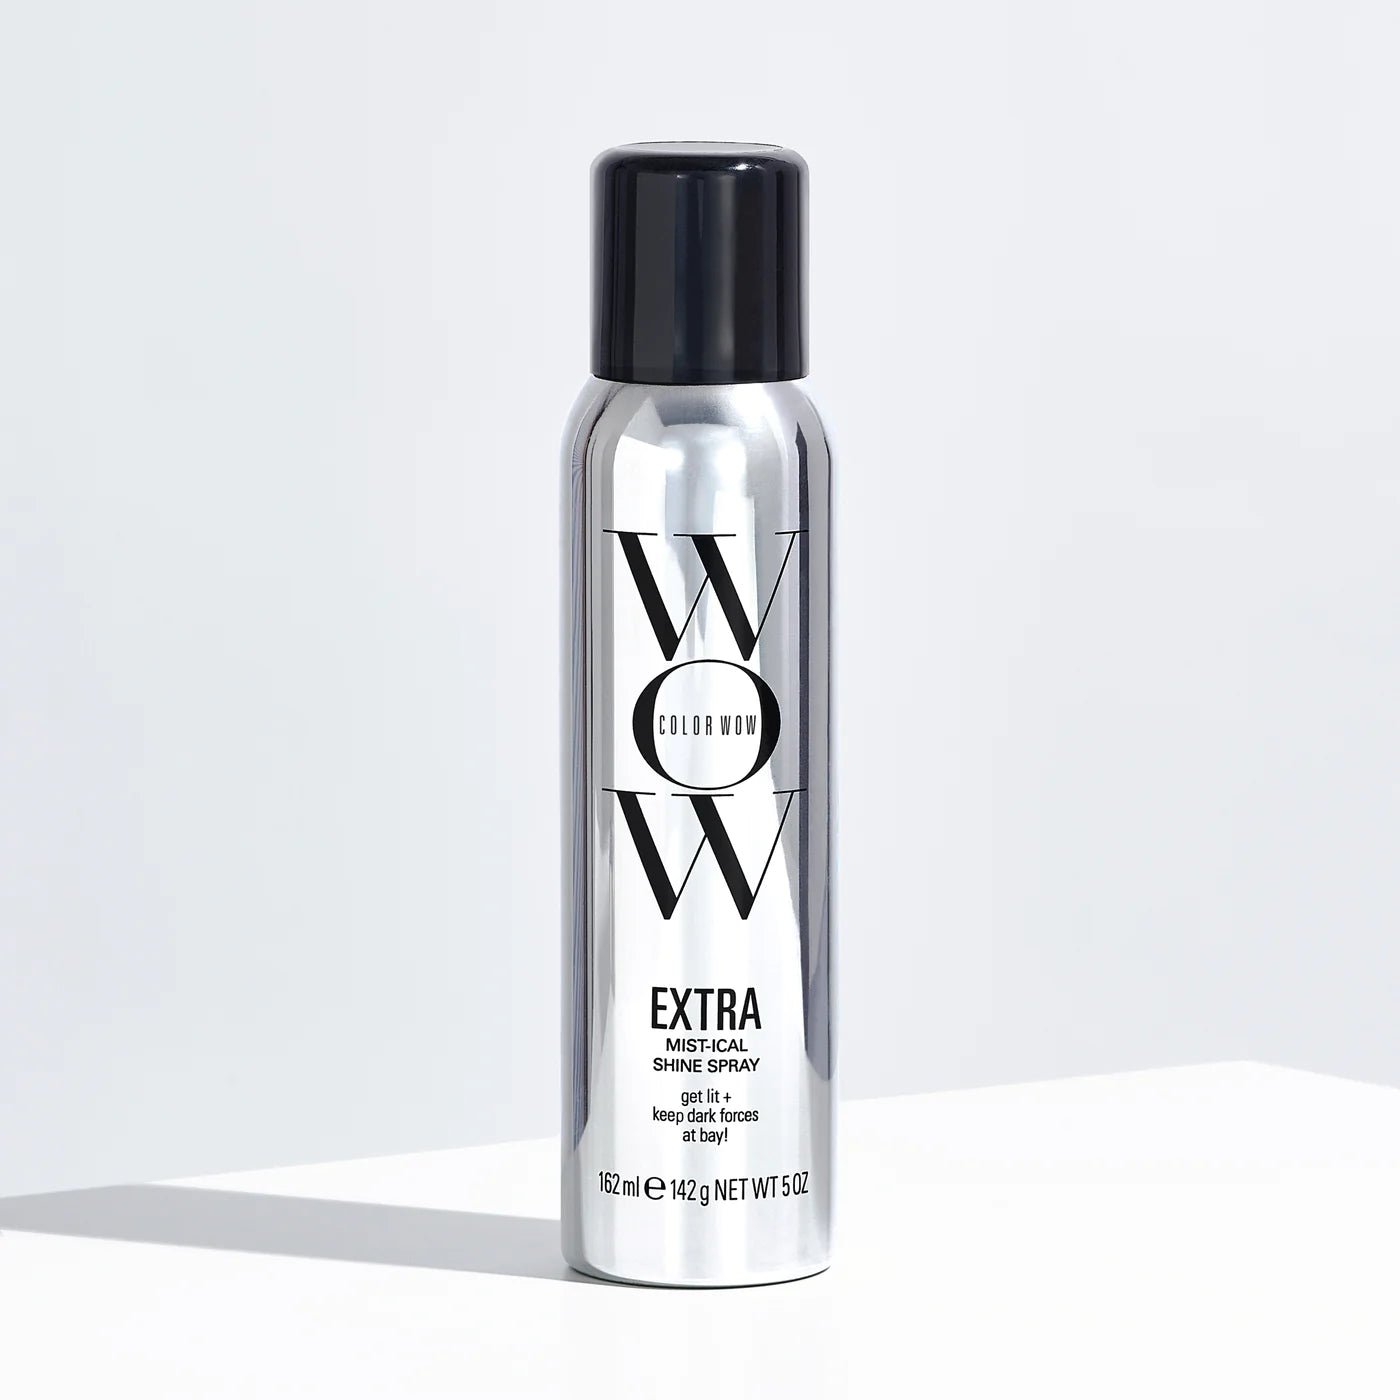 Color WOW Extra Mist-ical Shine Spray 162ml - shelley and co